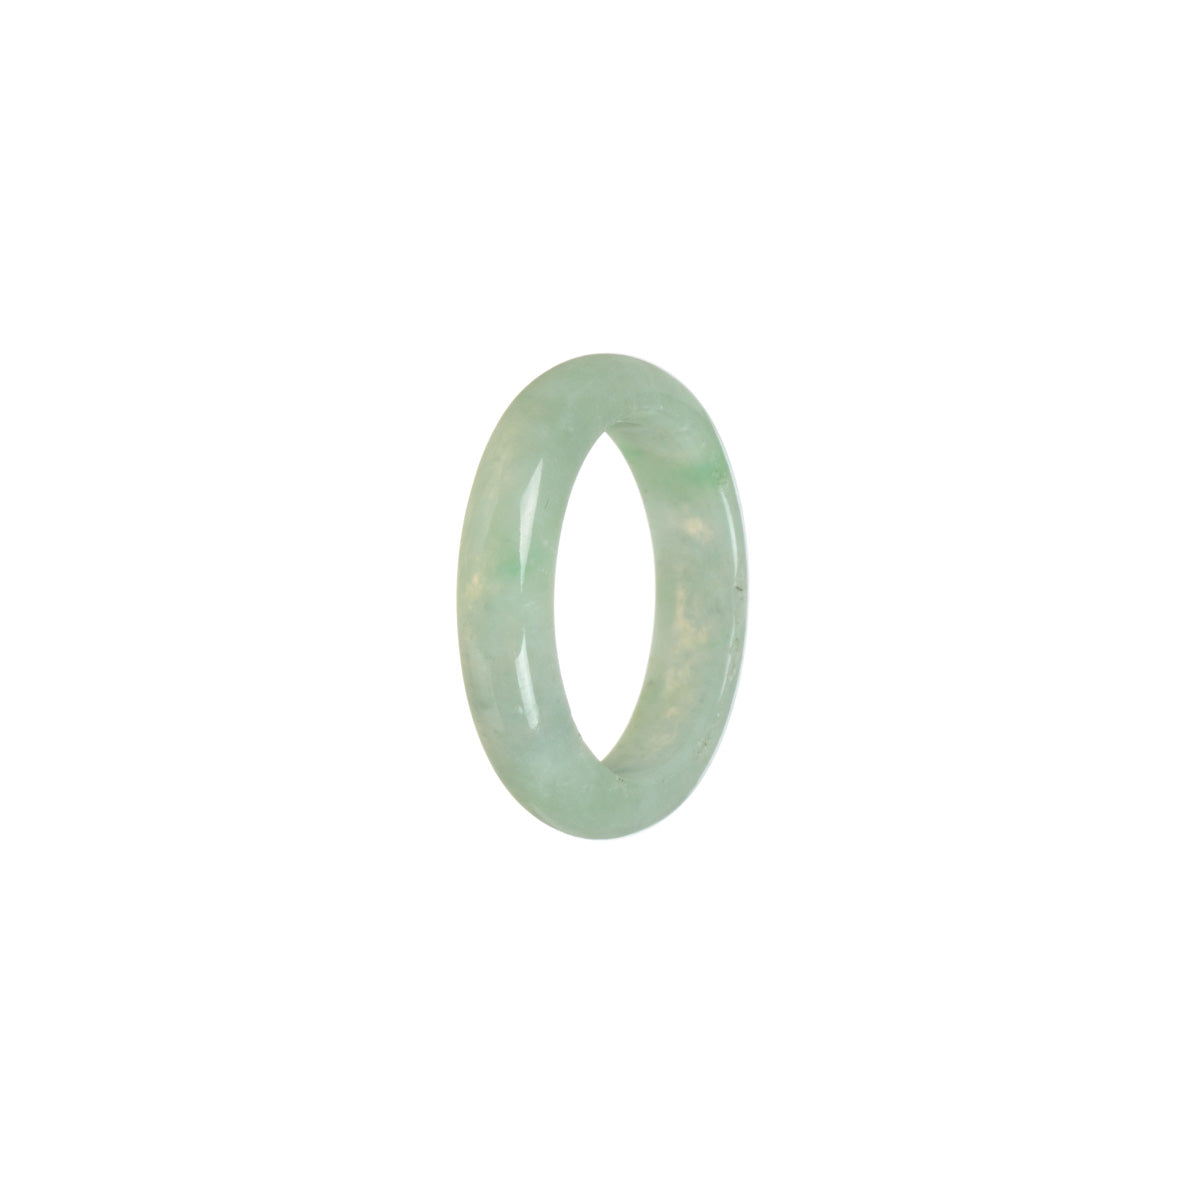 Real Icy White with Apple Green Burma Jade Ring - Size S